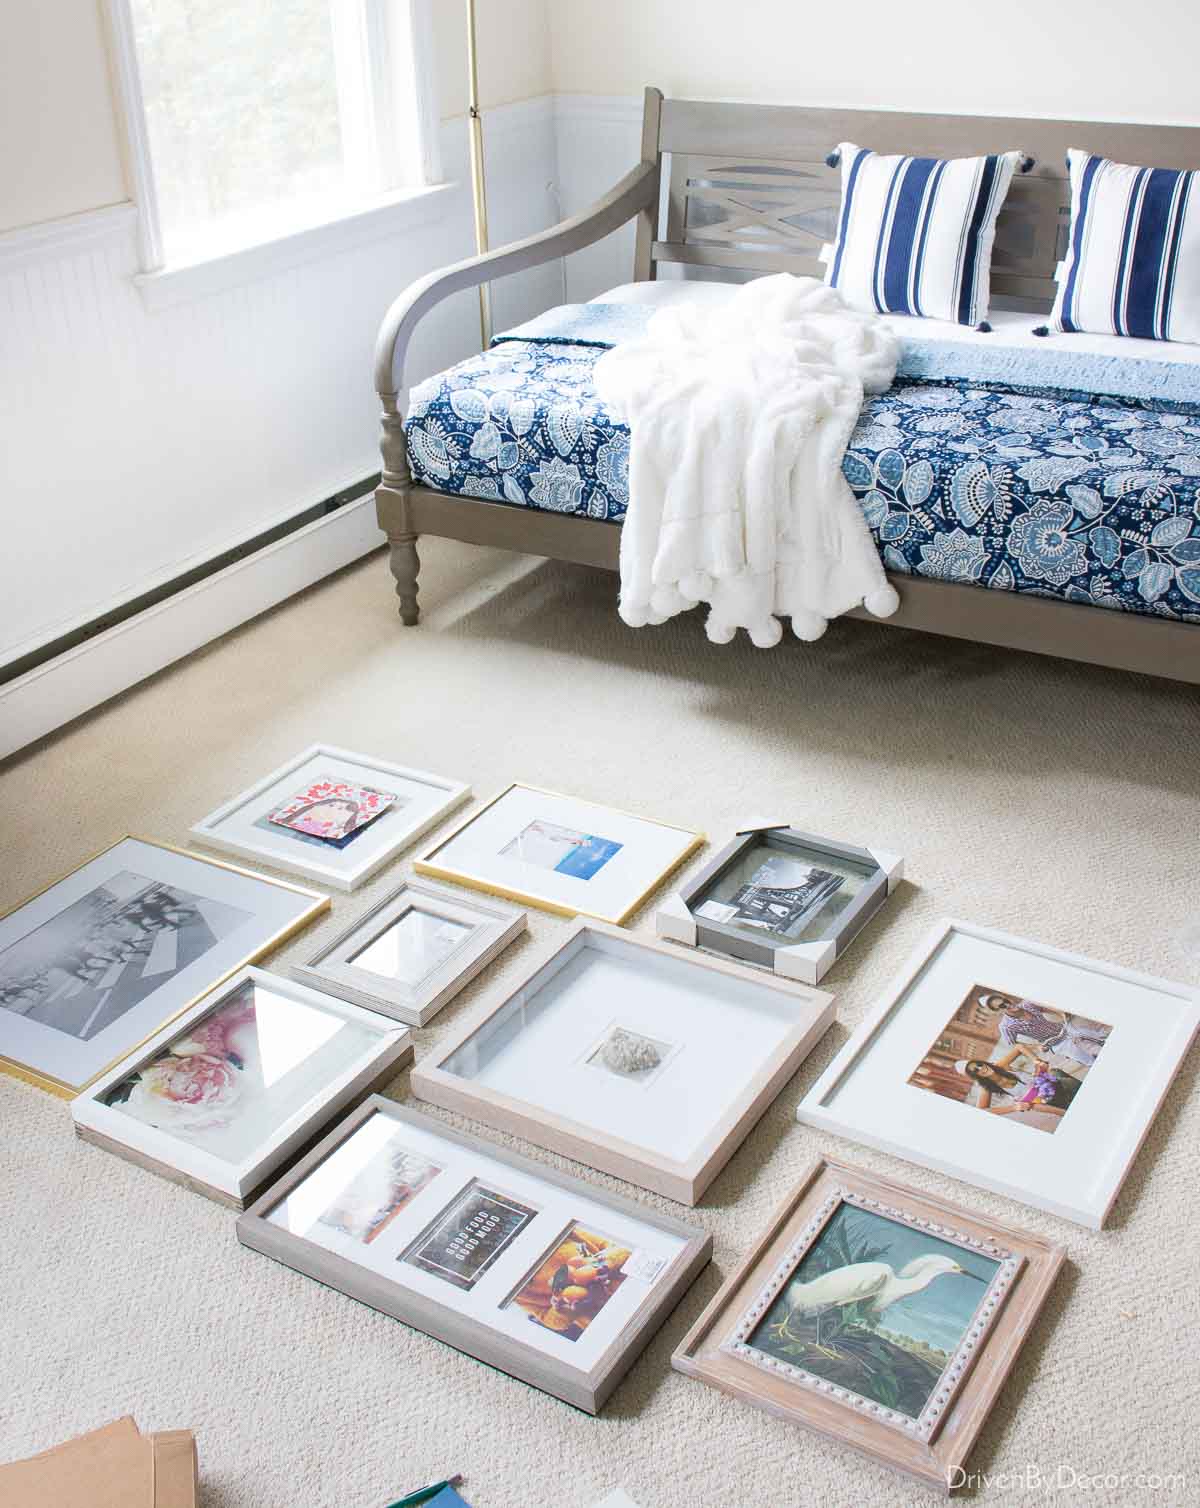 Laying out frames on floor to plan a gallery wall